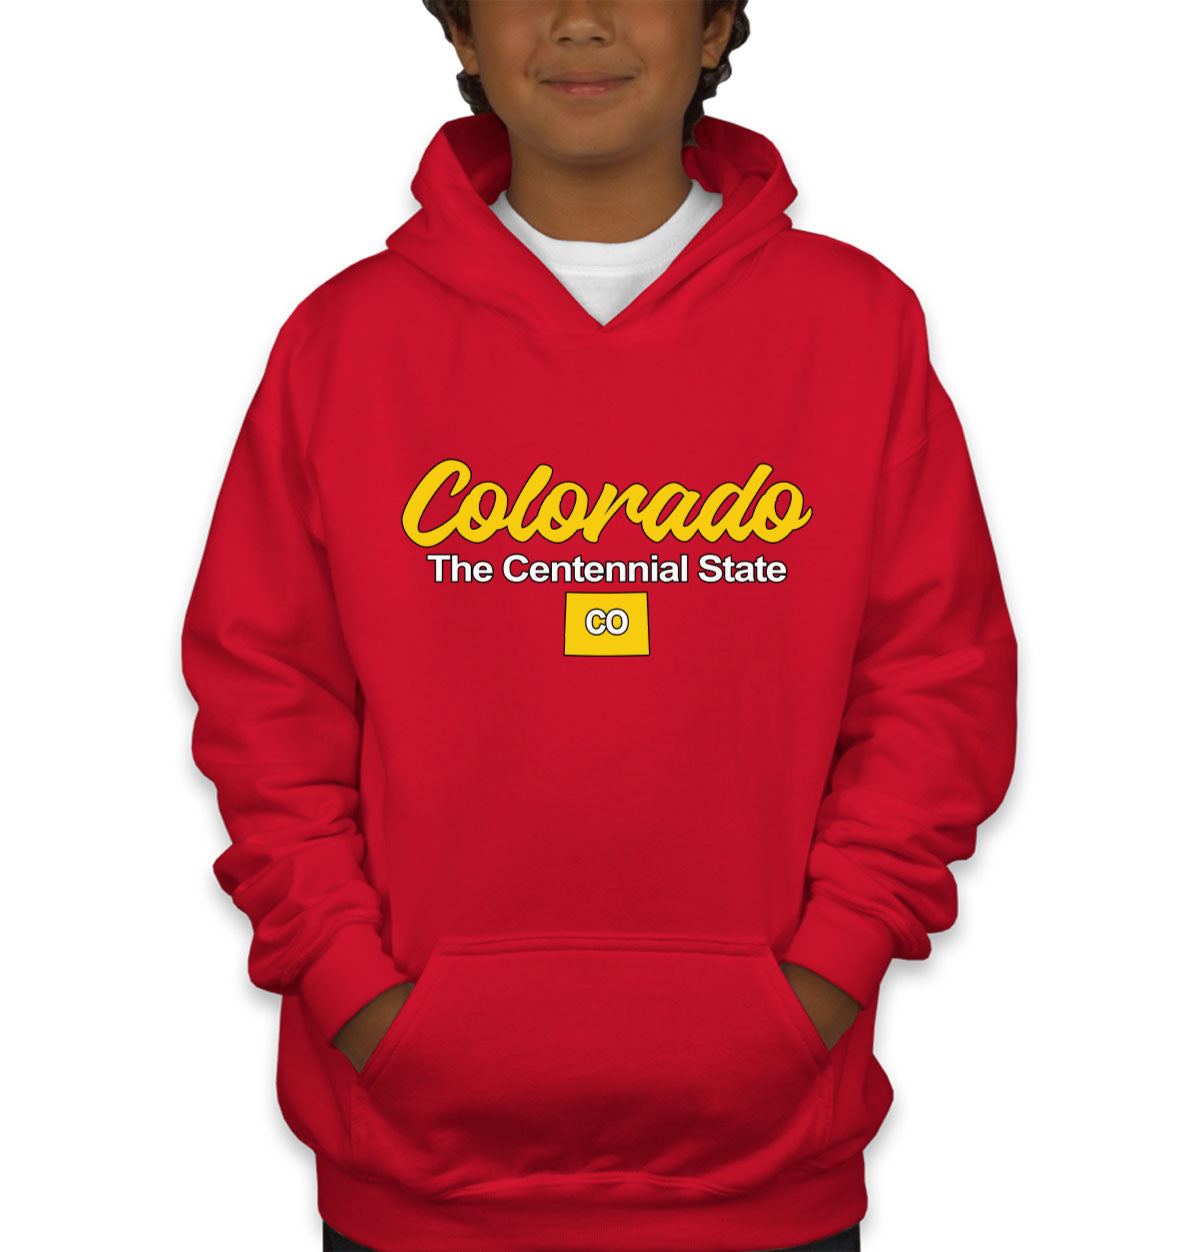 Colorado The Centennial State Youth Hoodie